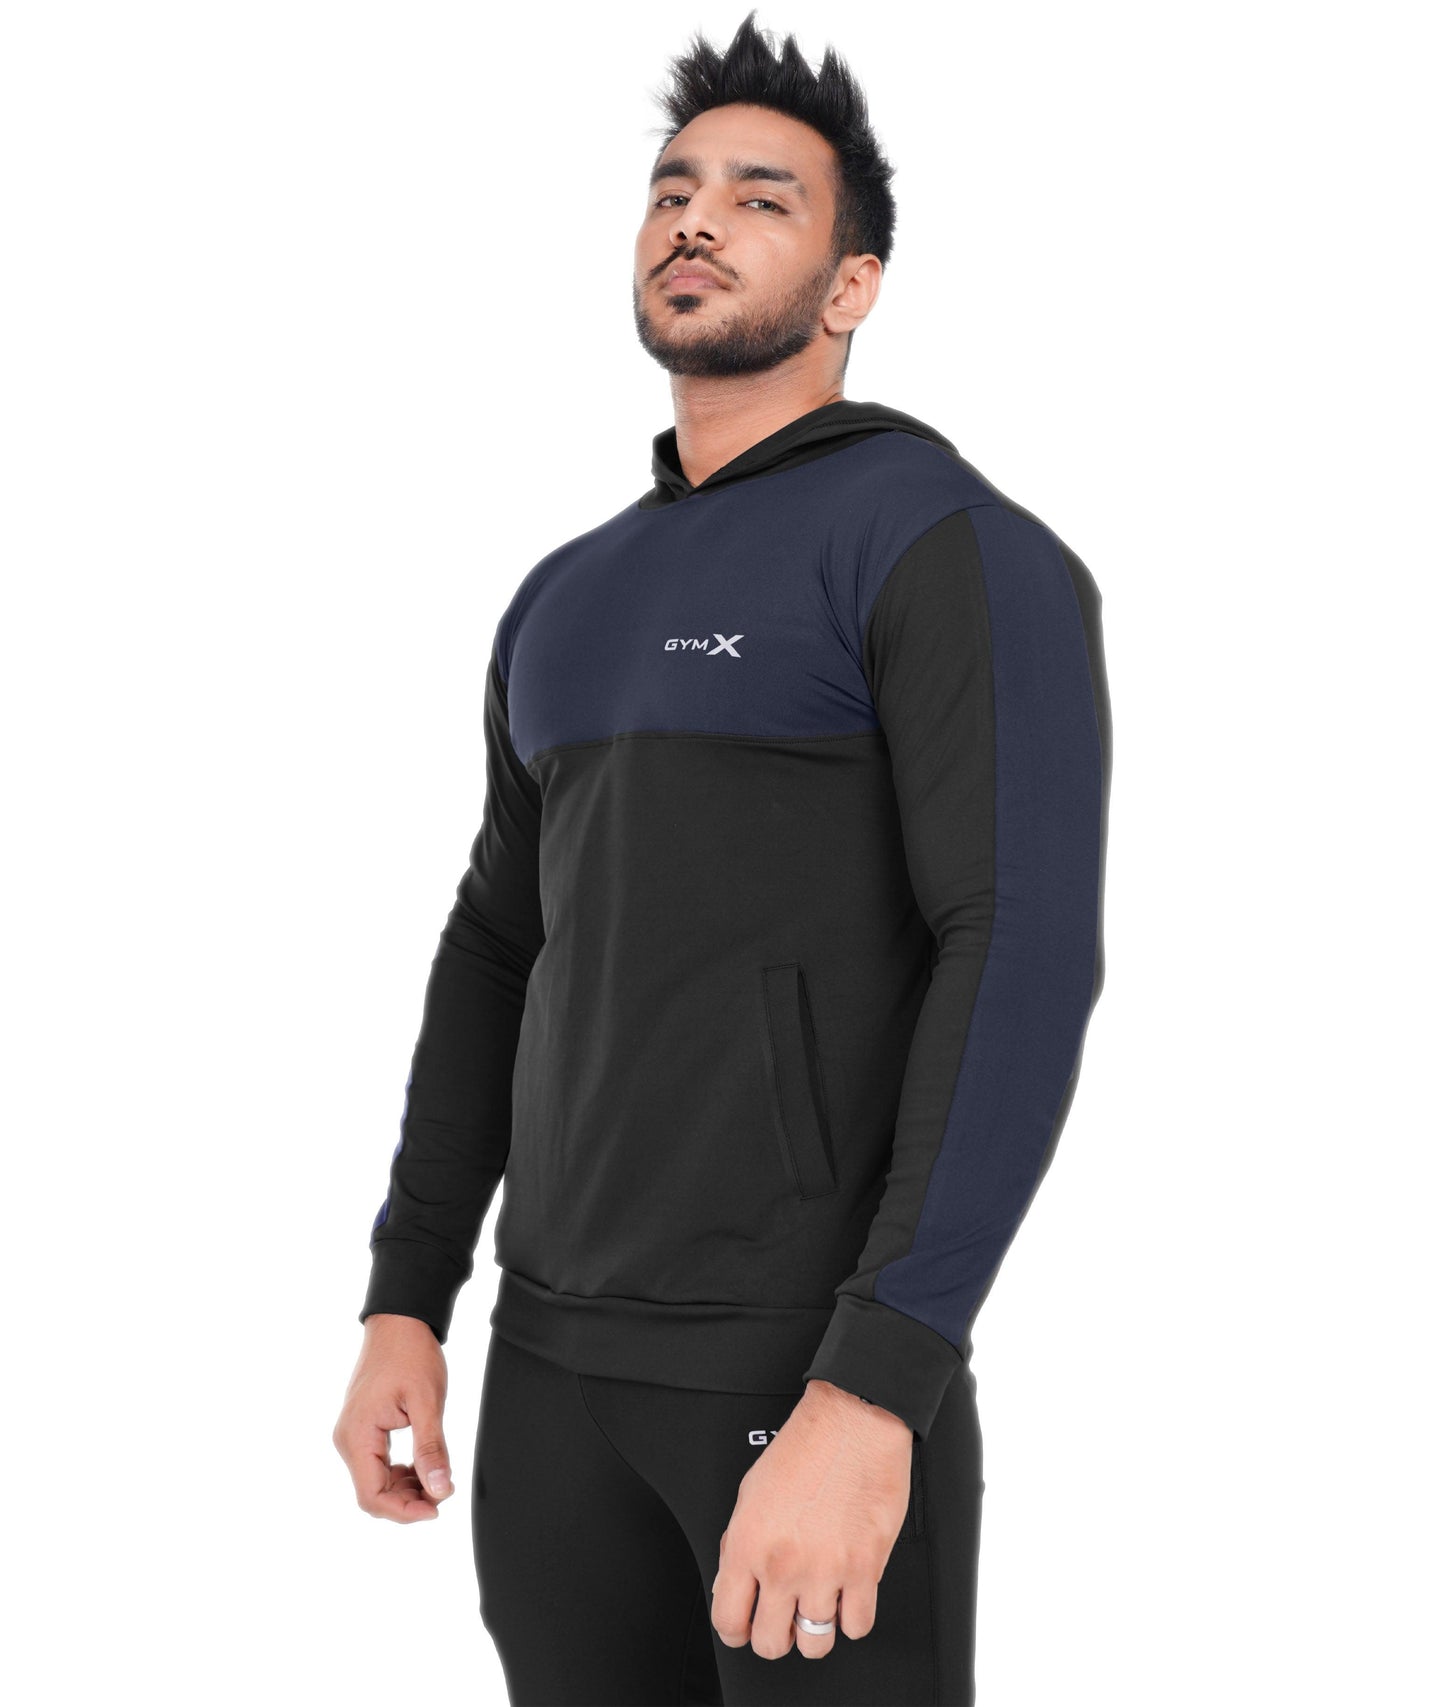 Dual Edition GymX Pullover: Navy Blue- SALE